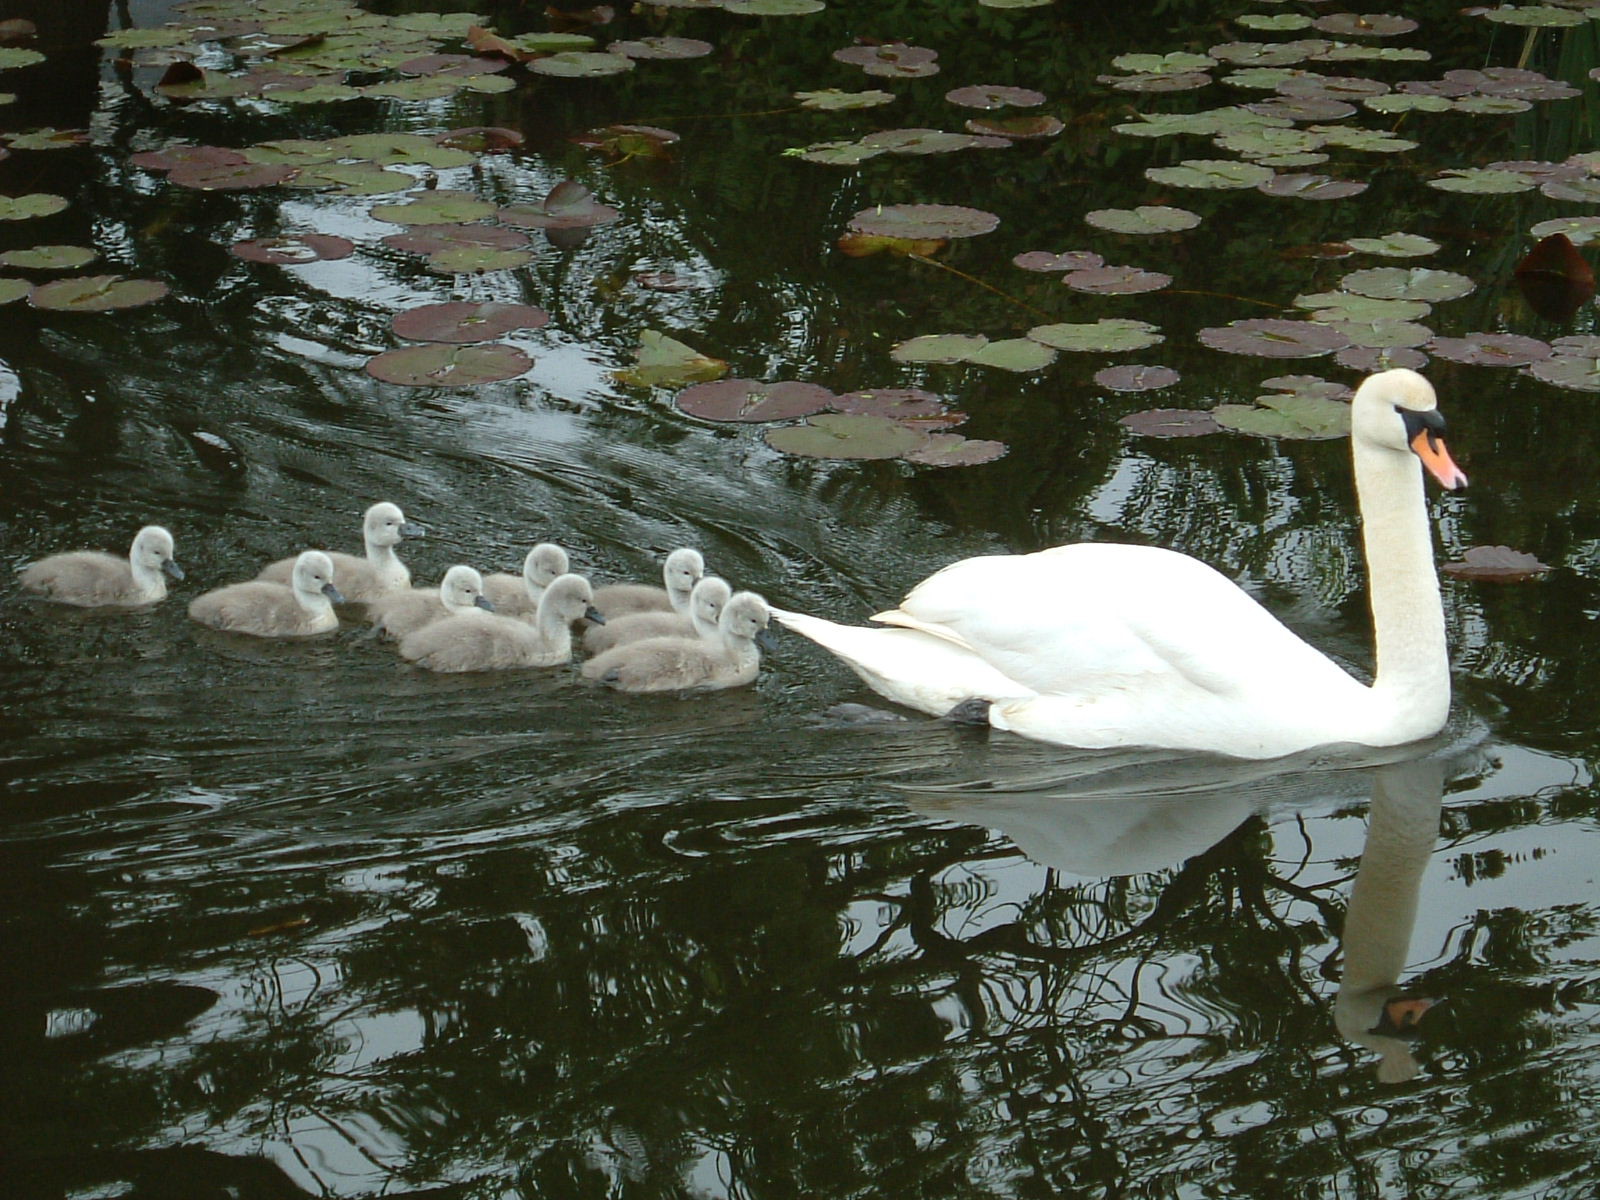 A family of swans in Sampford Peverell